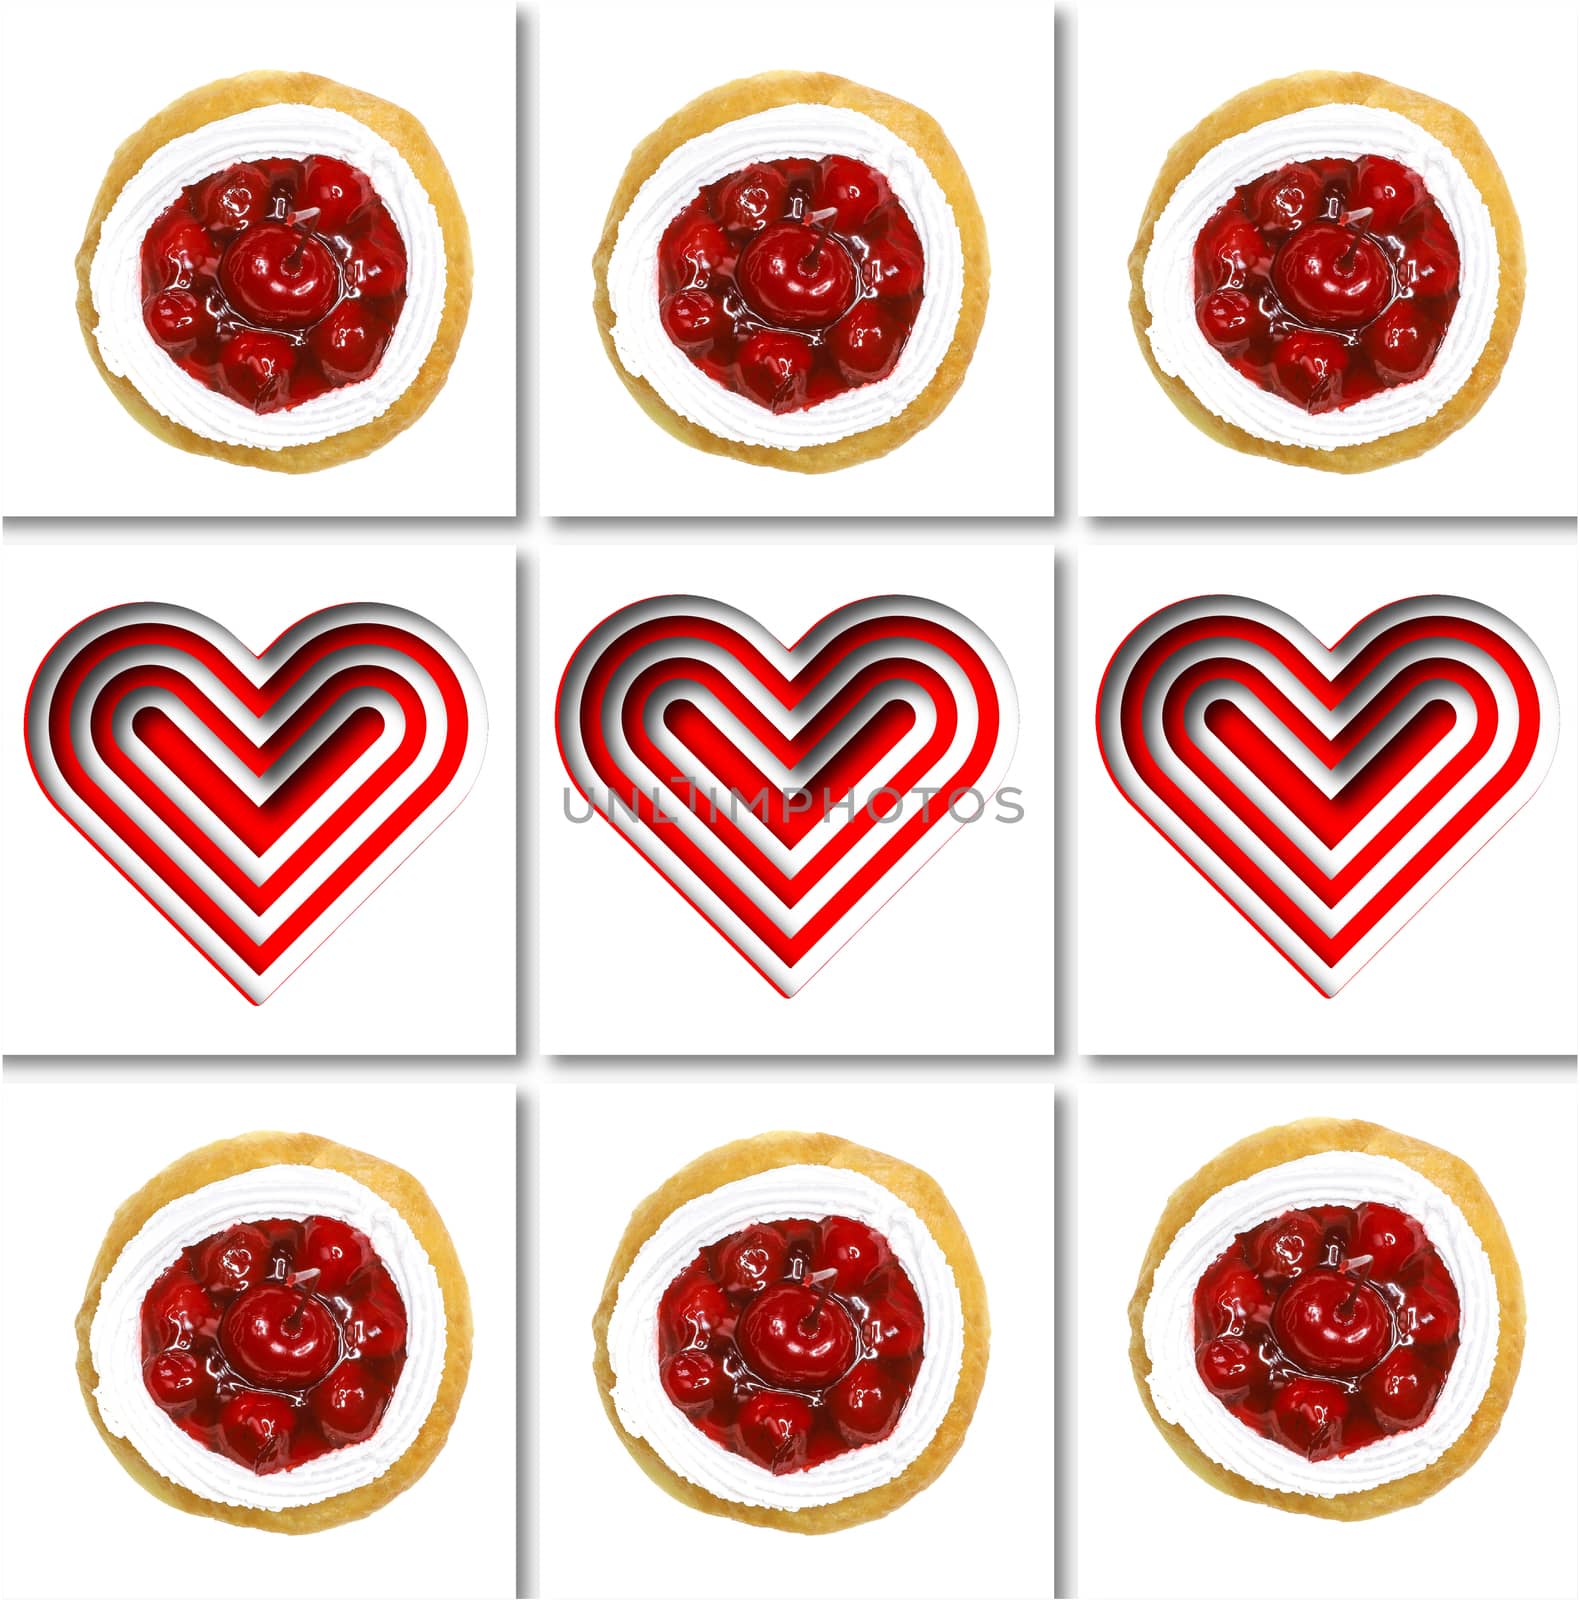 a square pattern made of images of cherry jam and layered red and and white papercut hearts on white background. Illustration art.